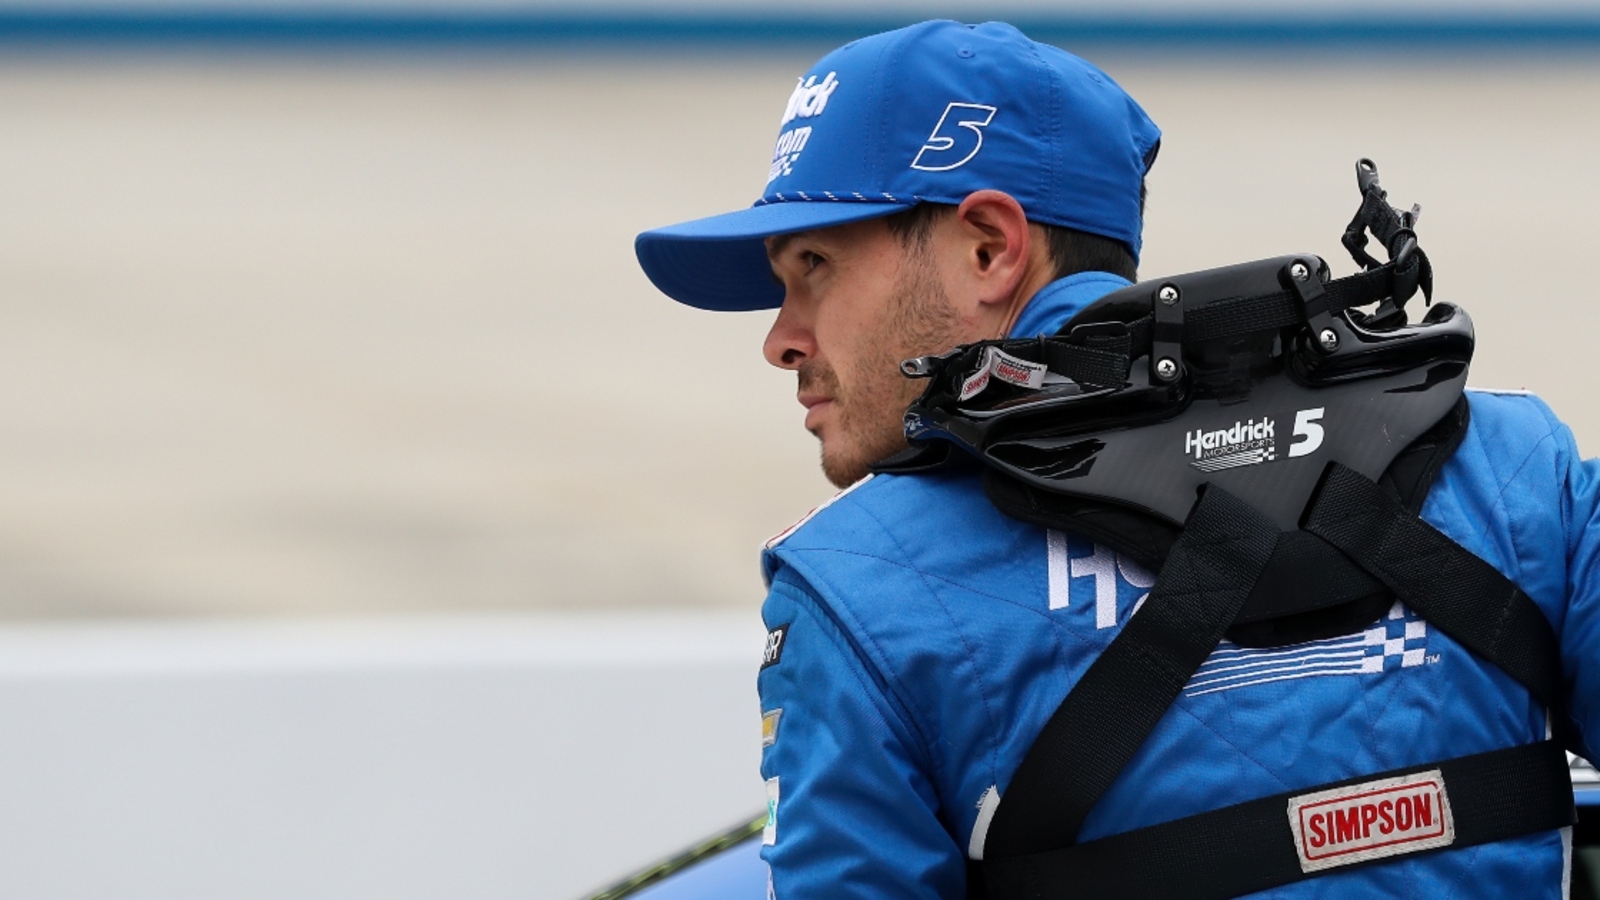 Kyle Larson competing for $50K in High Limit Racing series at Lakeside Speedway